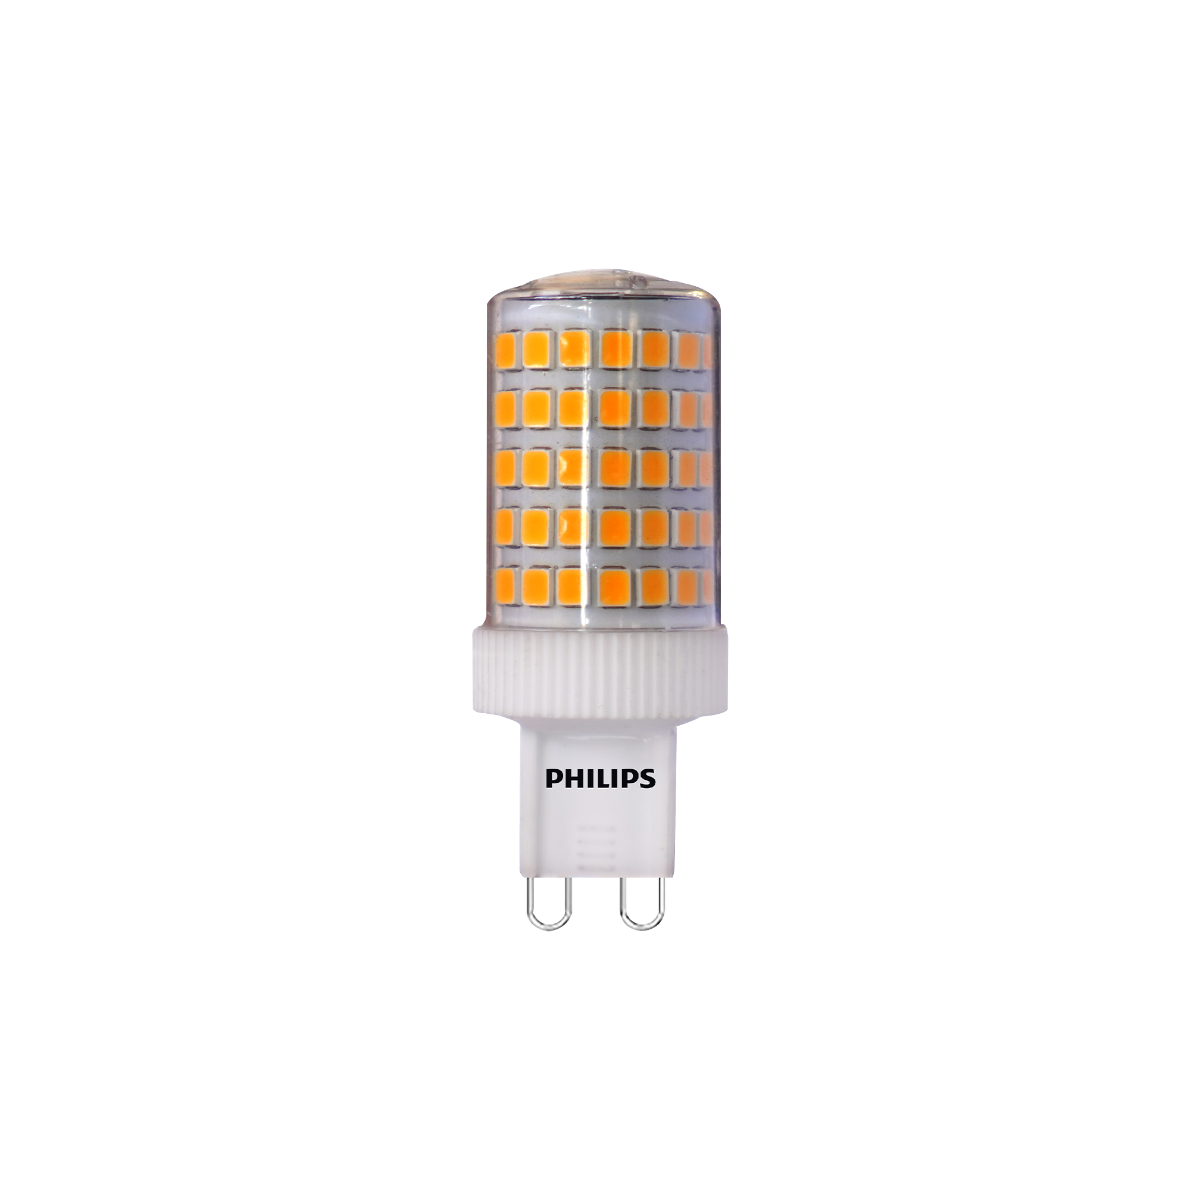 Philips G9 LED light bulb | ideal for Chandeliers & wall lights